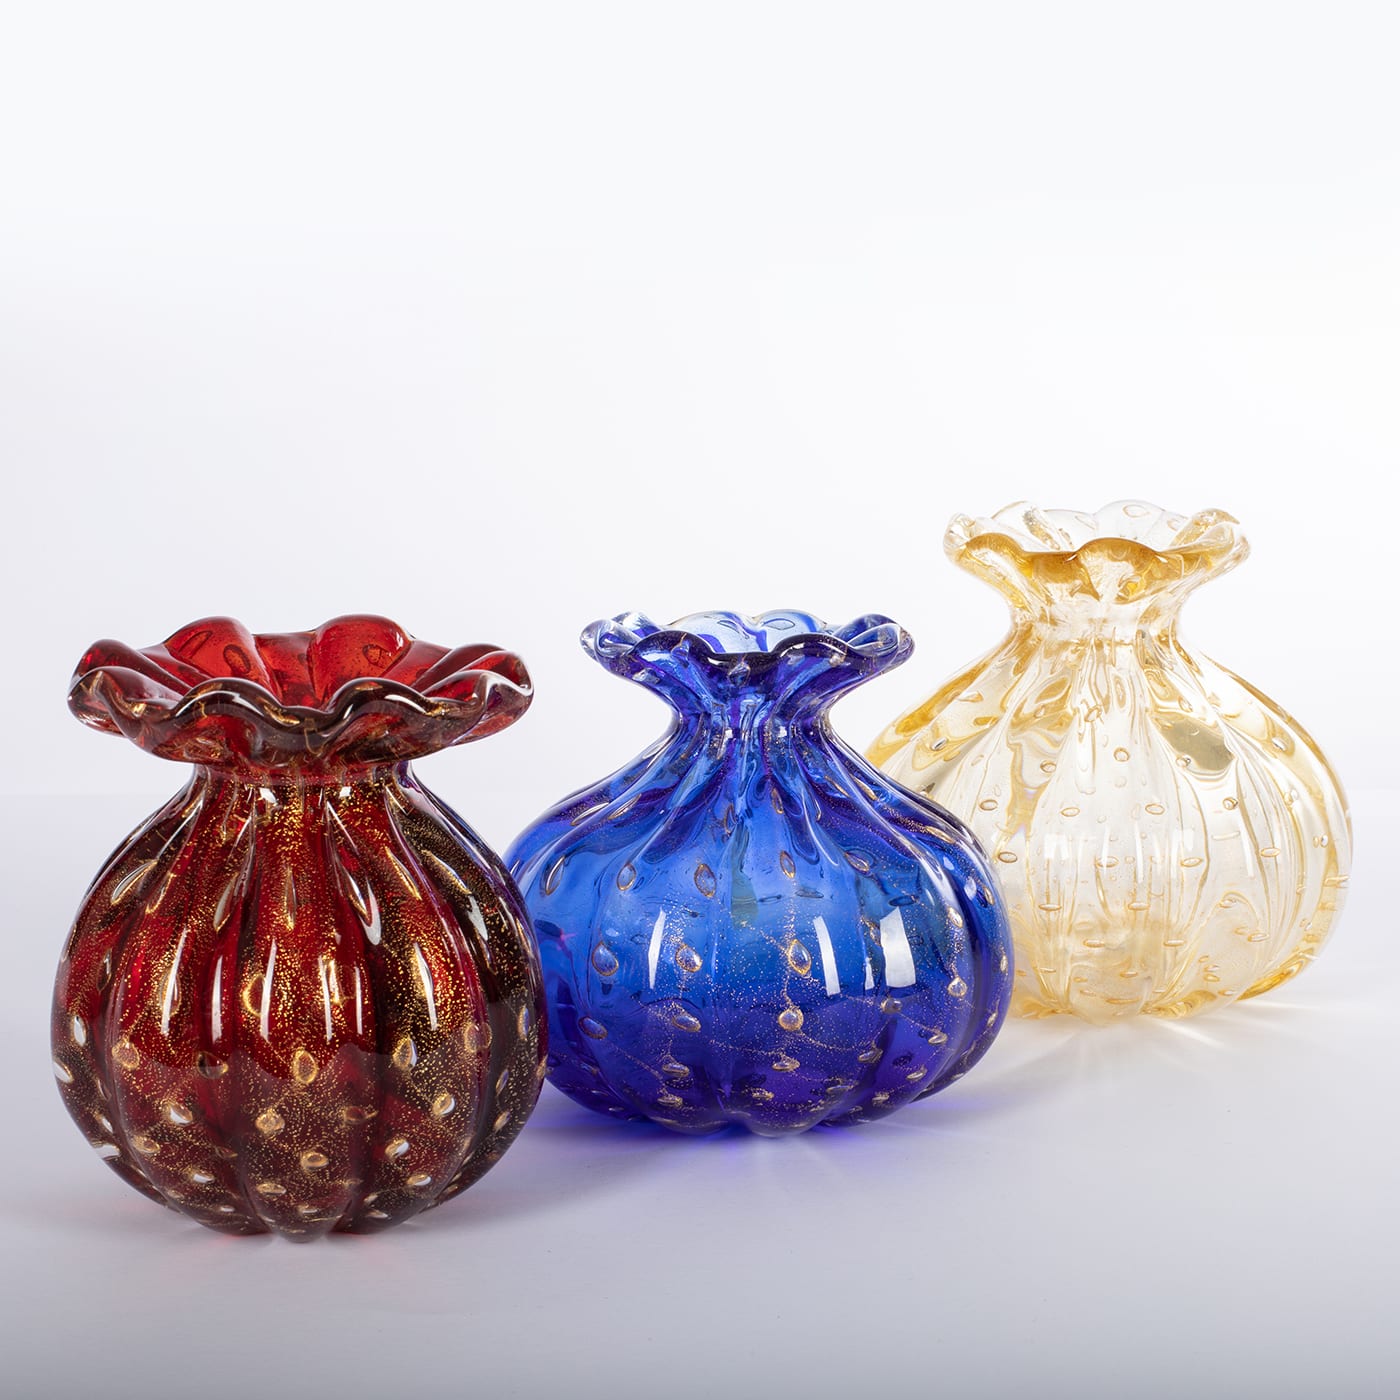 1950 Polychrome Set of 3 Vases with Gold Bubbles - Officine di Murano 1295